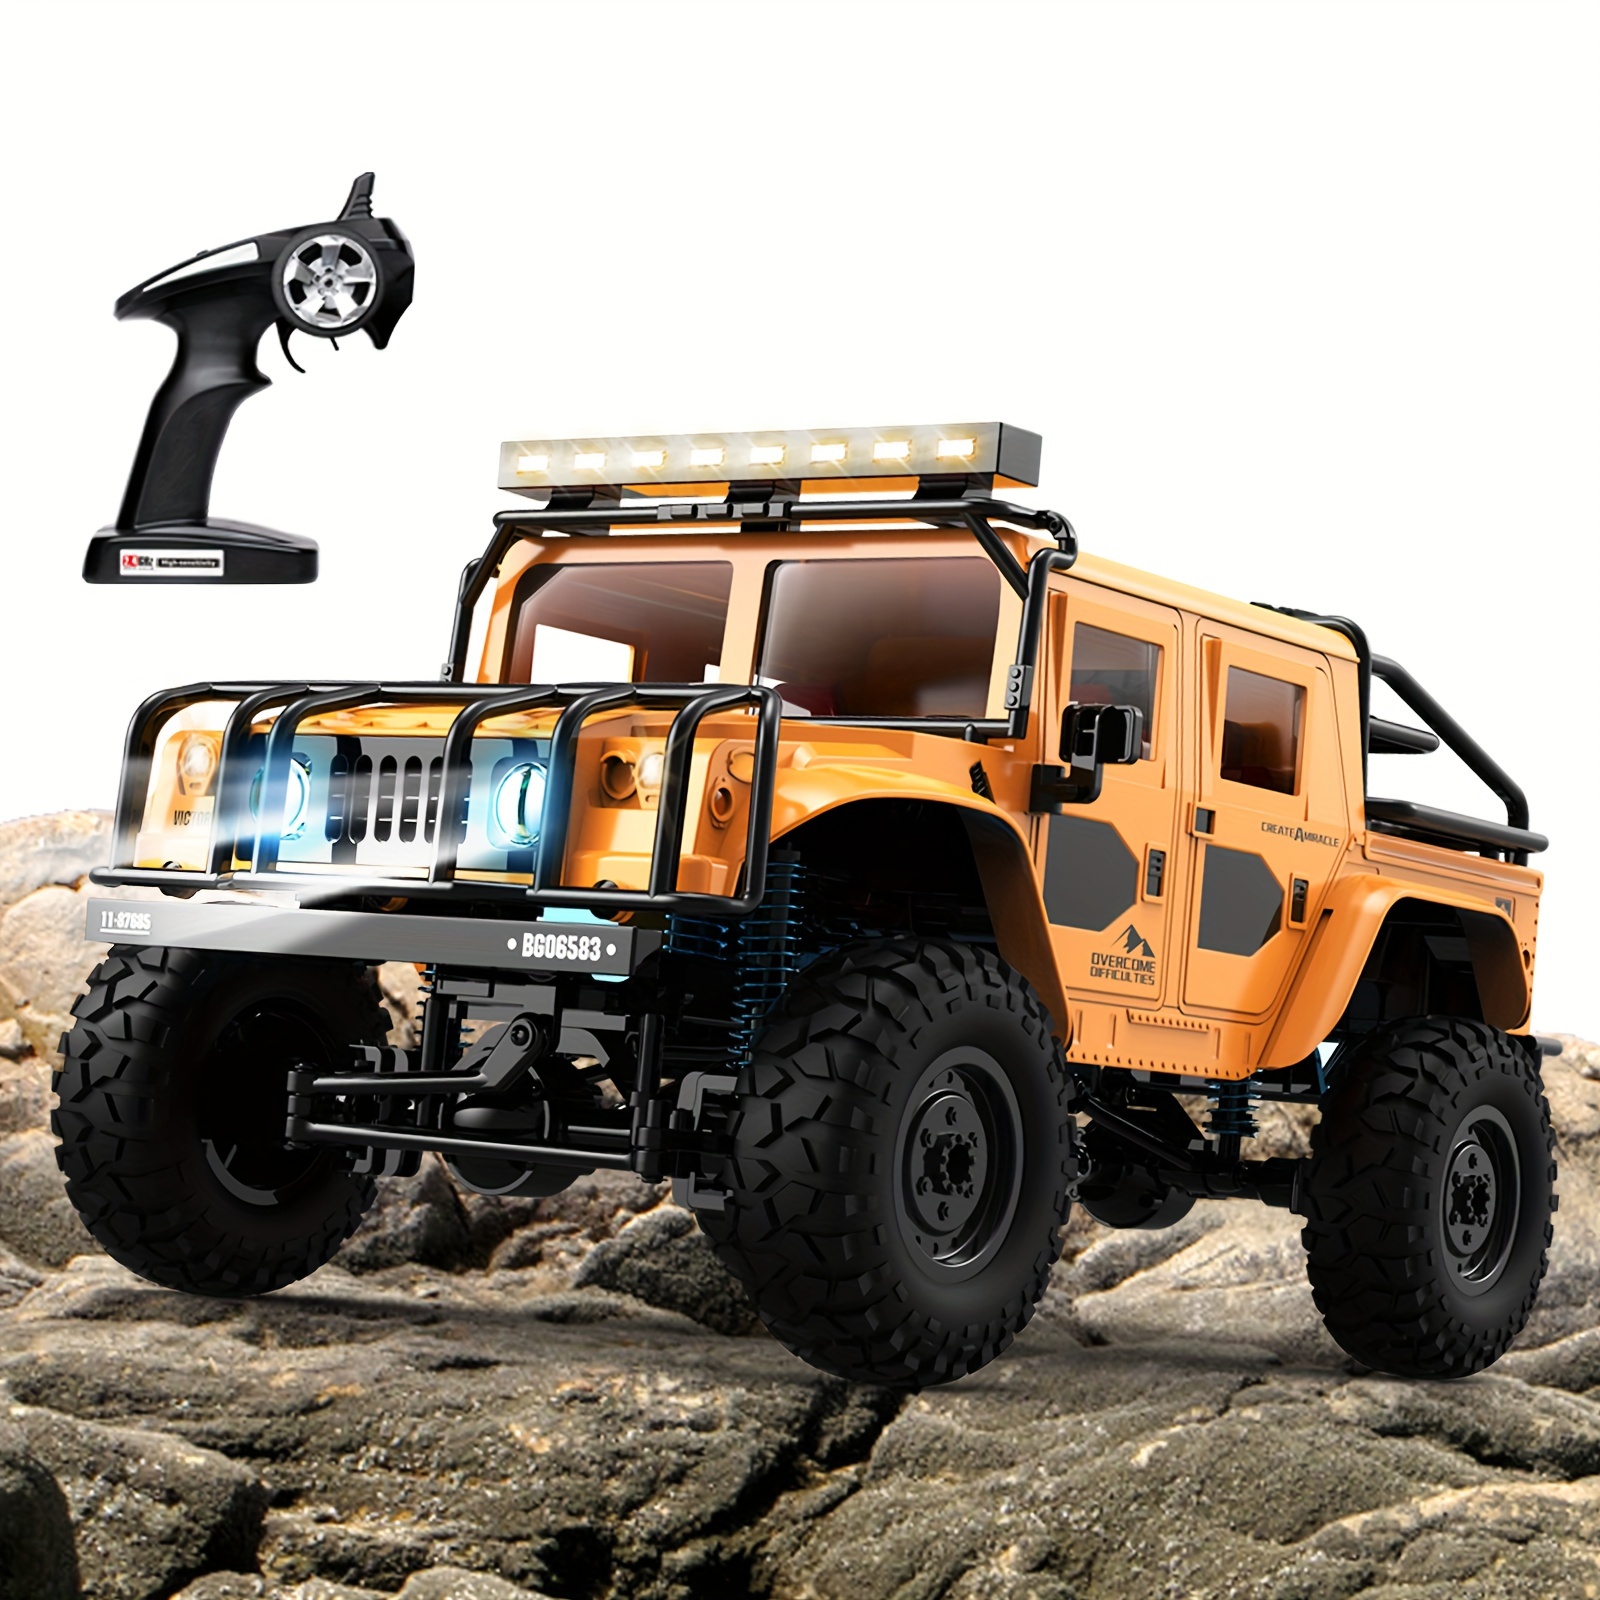 

Rc Car Remote Control Off-road Vehicle Remote Control 1:12 Full-size Four-wheel Drive Uphill Off-road Vehicle, High-speed Shock-absorbing Toy Car